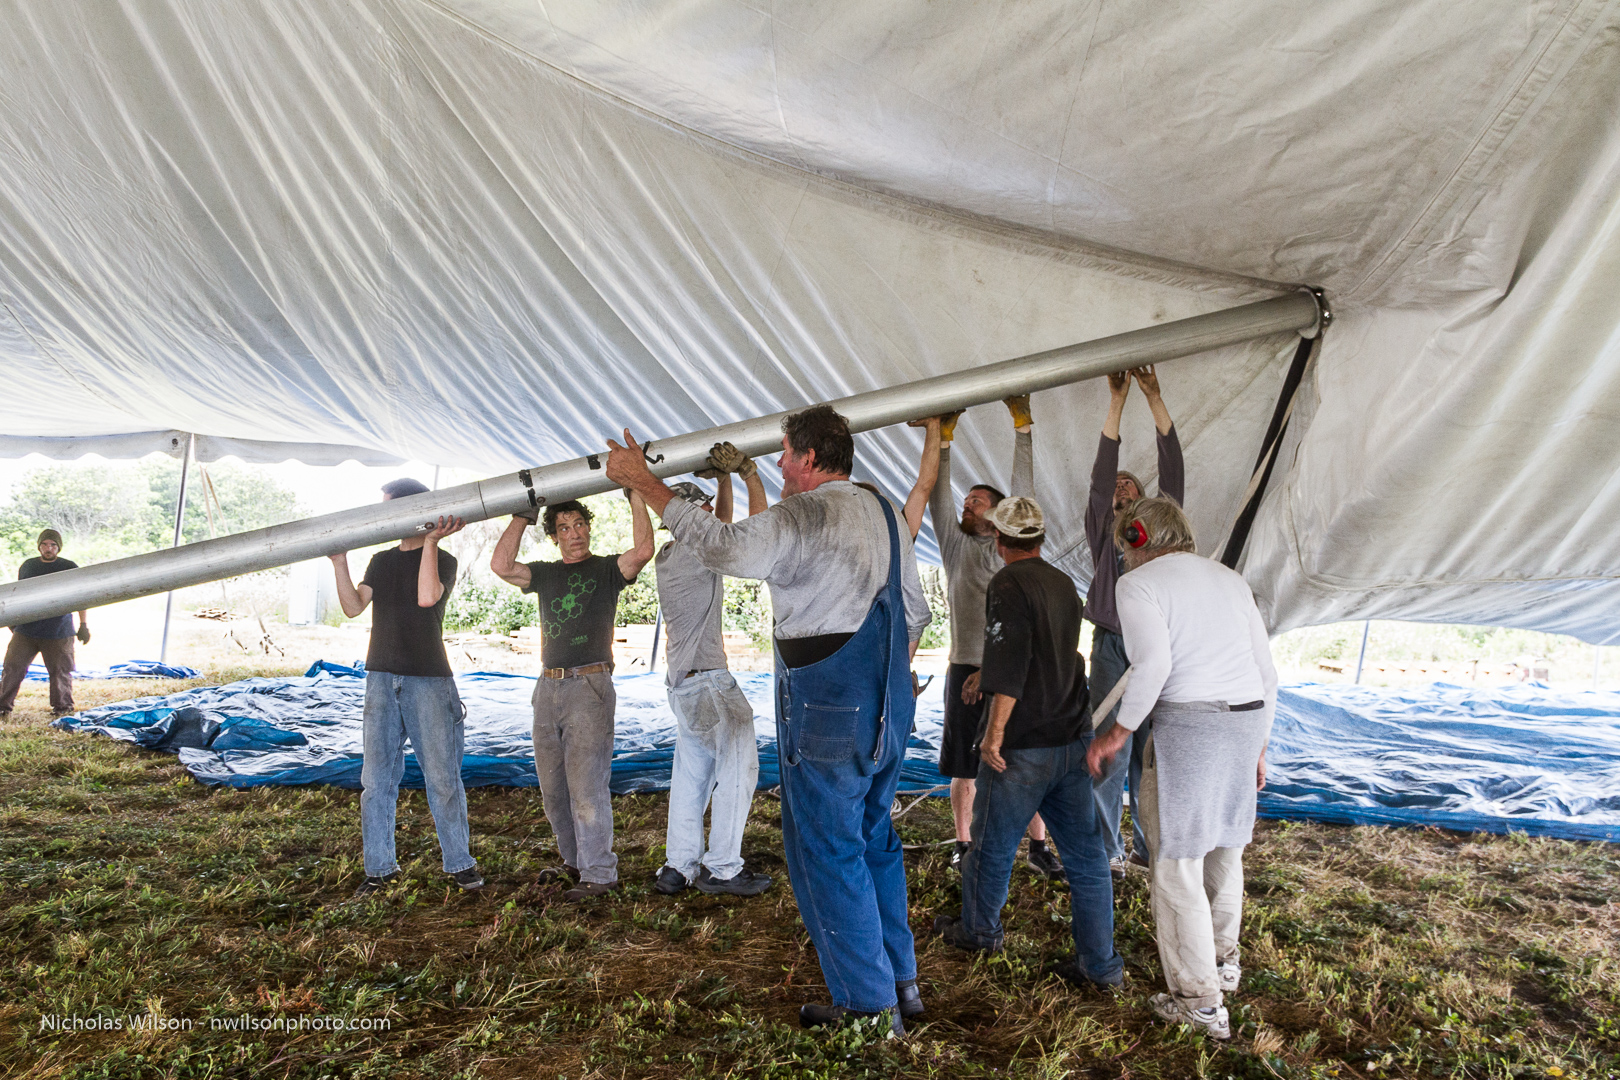 Raising the 800-seat concert hall tent takes know-how and skill.